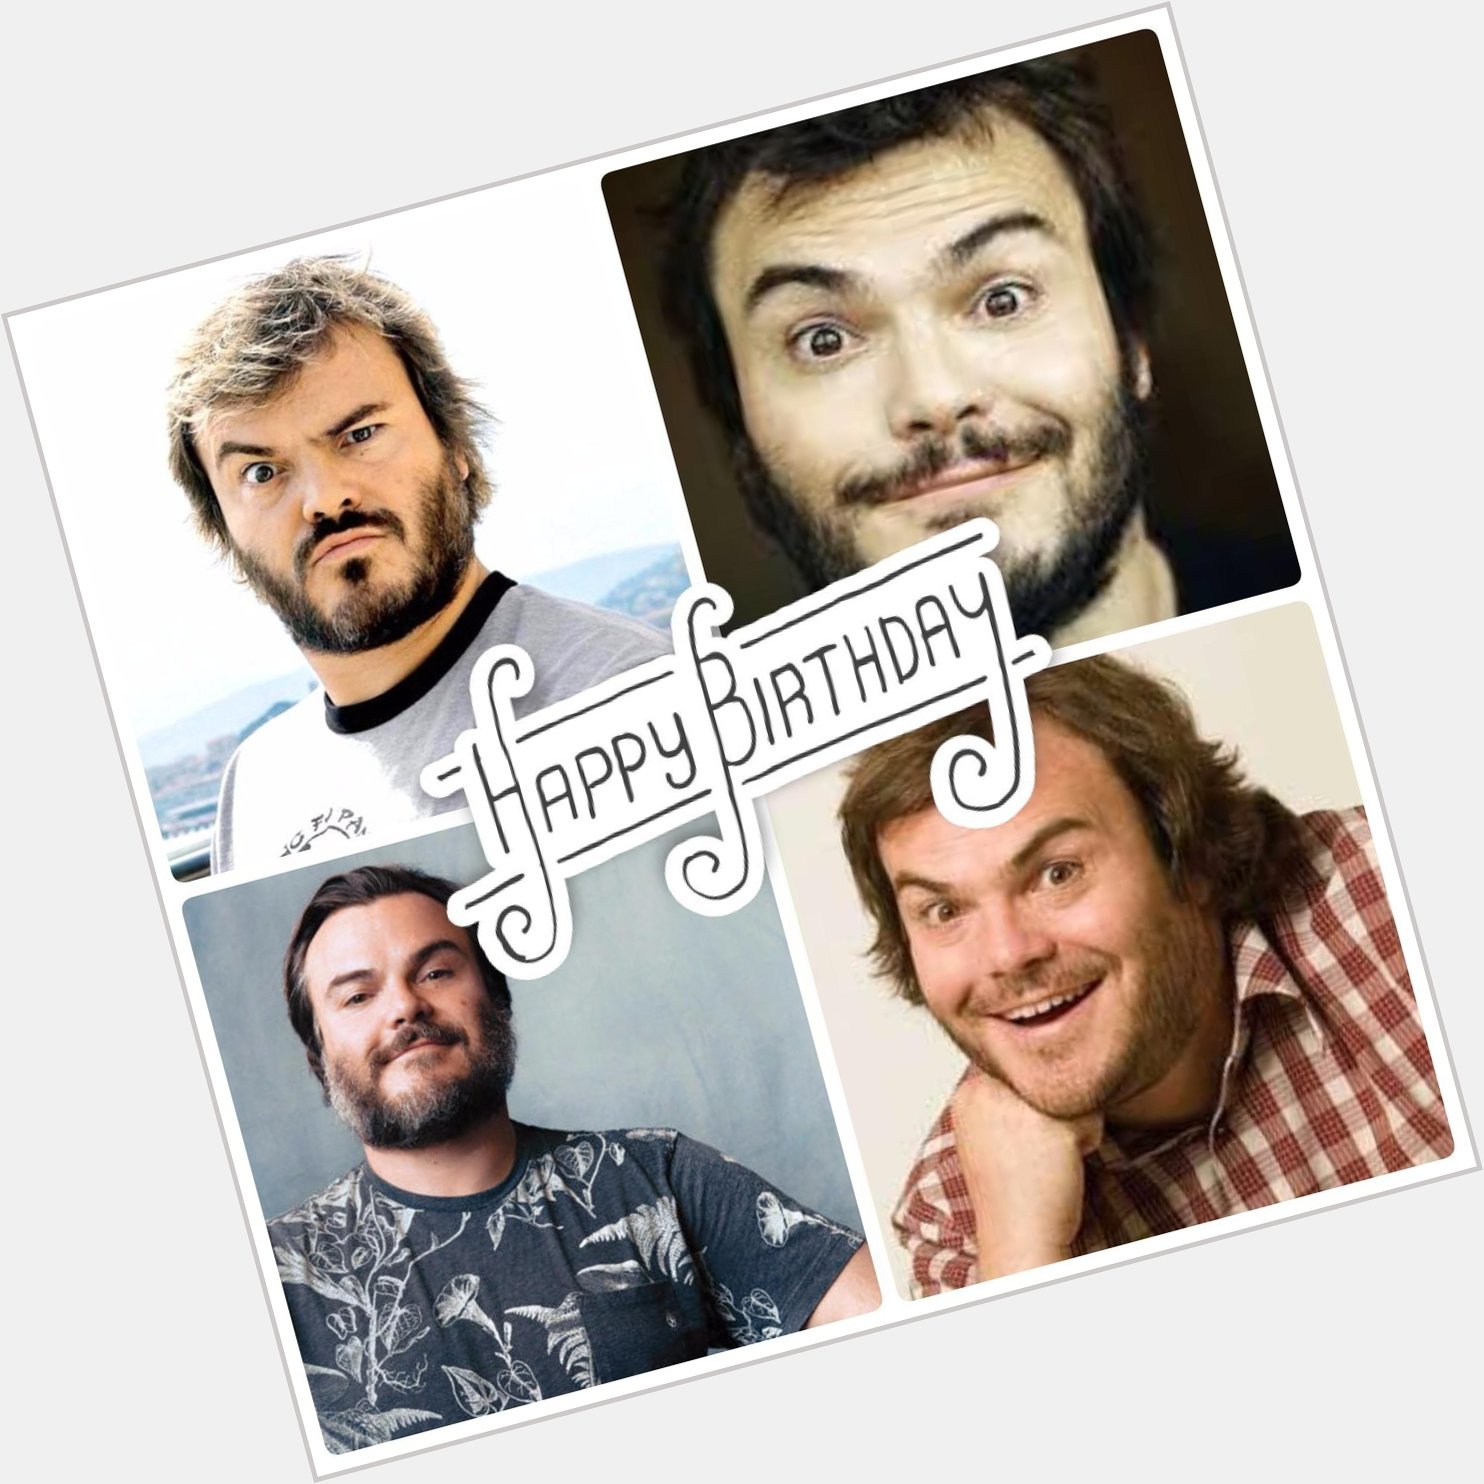 We\re super excited to wish Jack Black a very Happy Birthday!! We love everything you do!! 